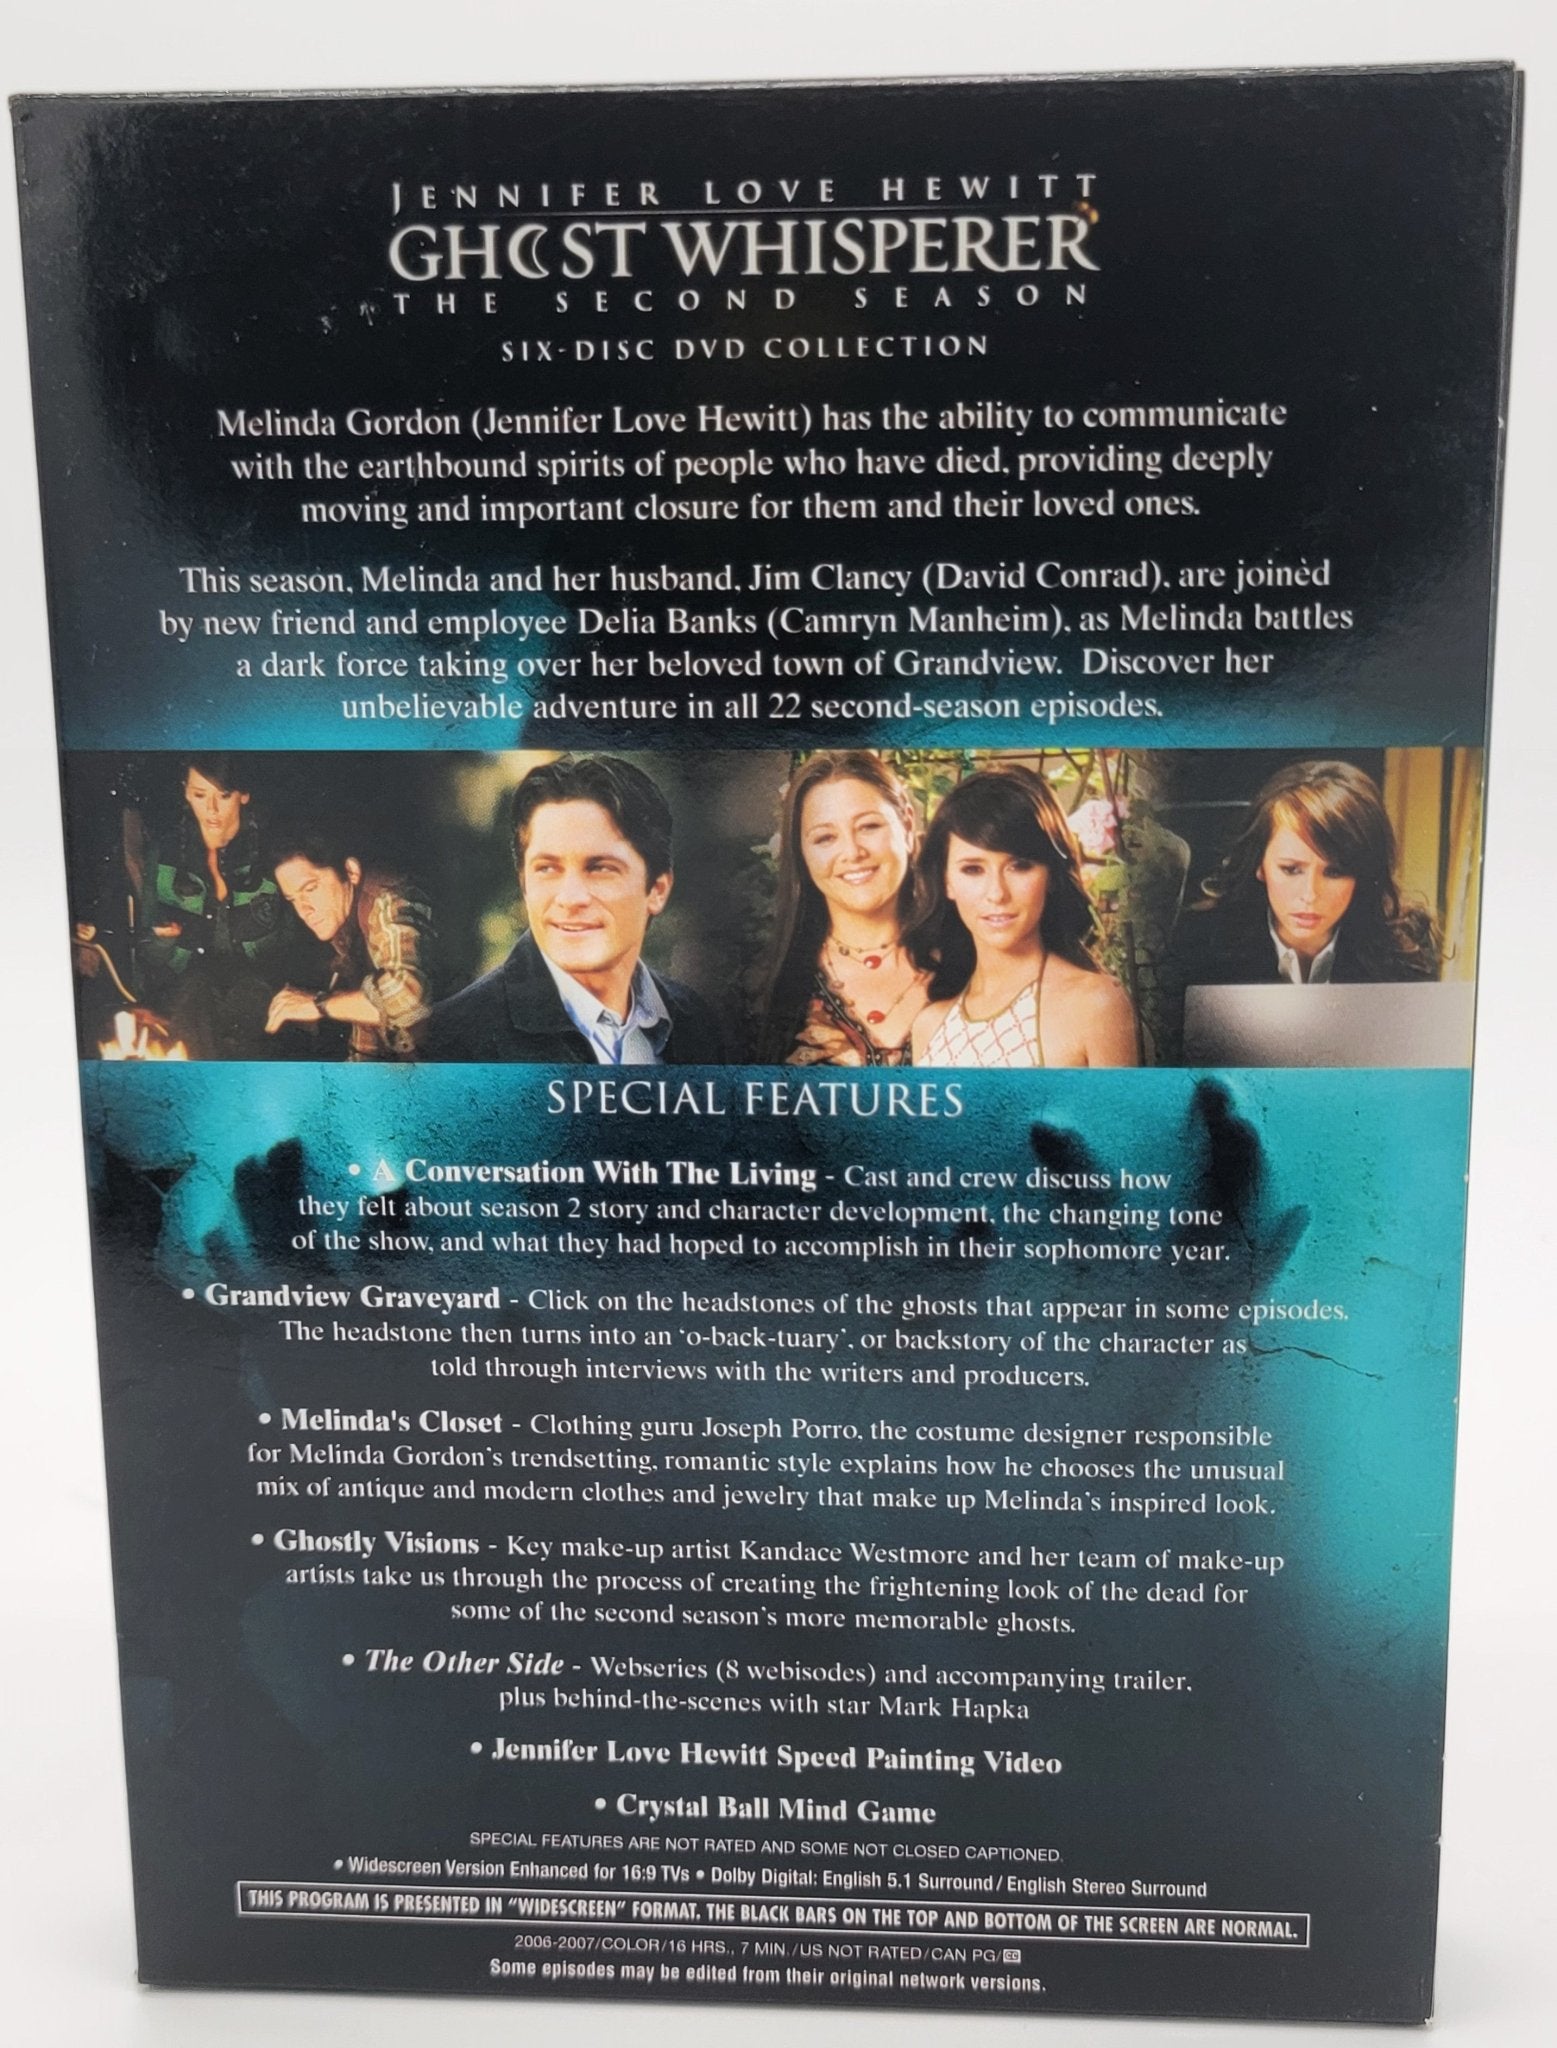 Paramount Pictures Home Entertainment - Ghost Whisperer - Season 2 | Widescreen | DVD - DVD - Steady Bunny Shop